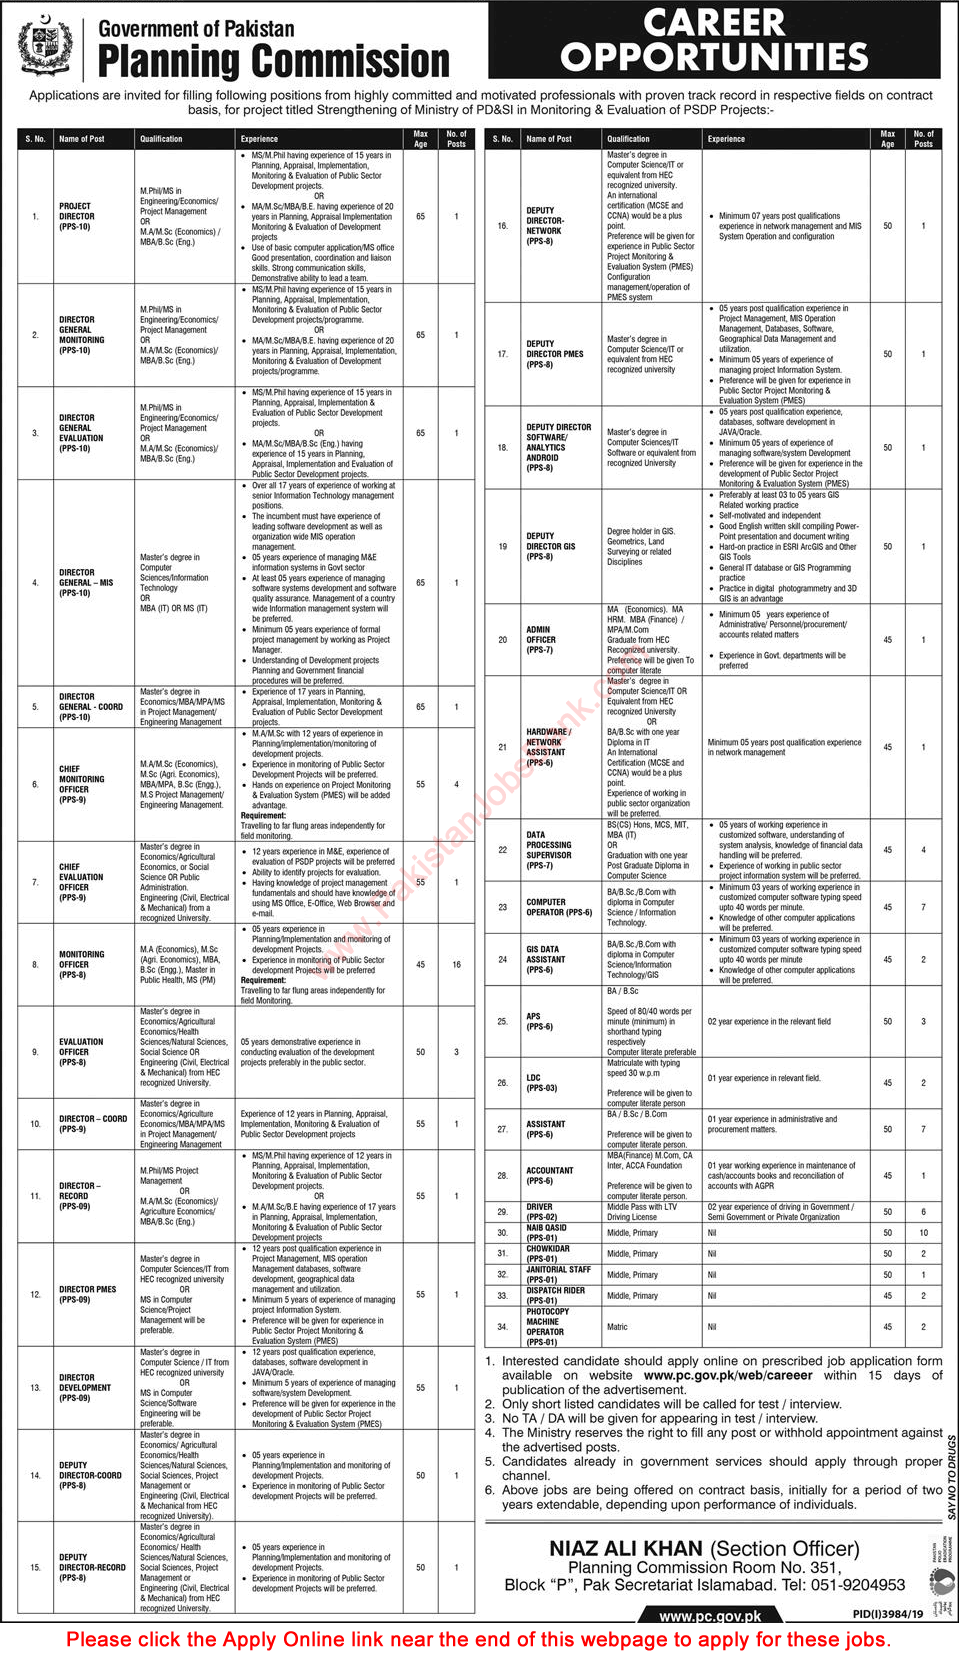 Planning Commission Jobs 2020 January Apply Online Project / Deputy Directors, Monitoring Officers & Others PC Latest